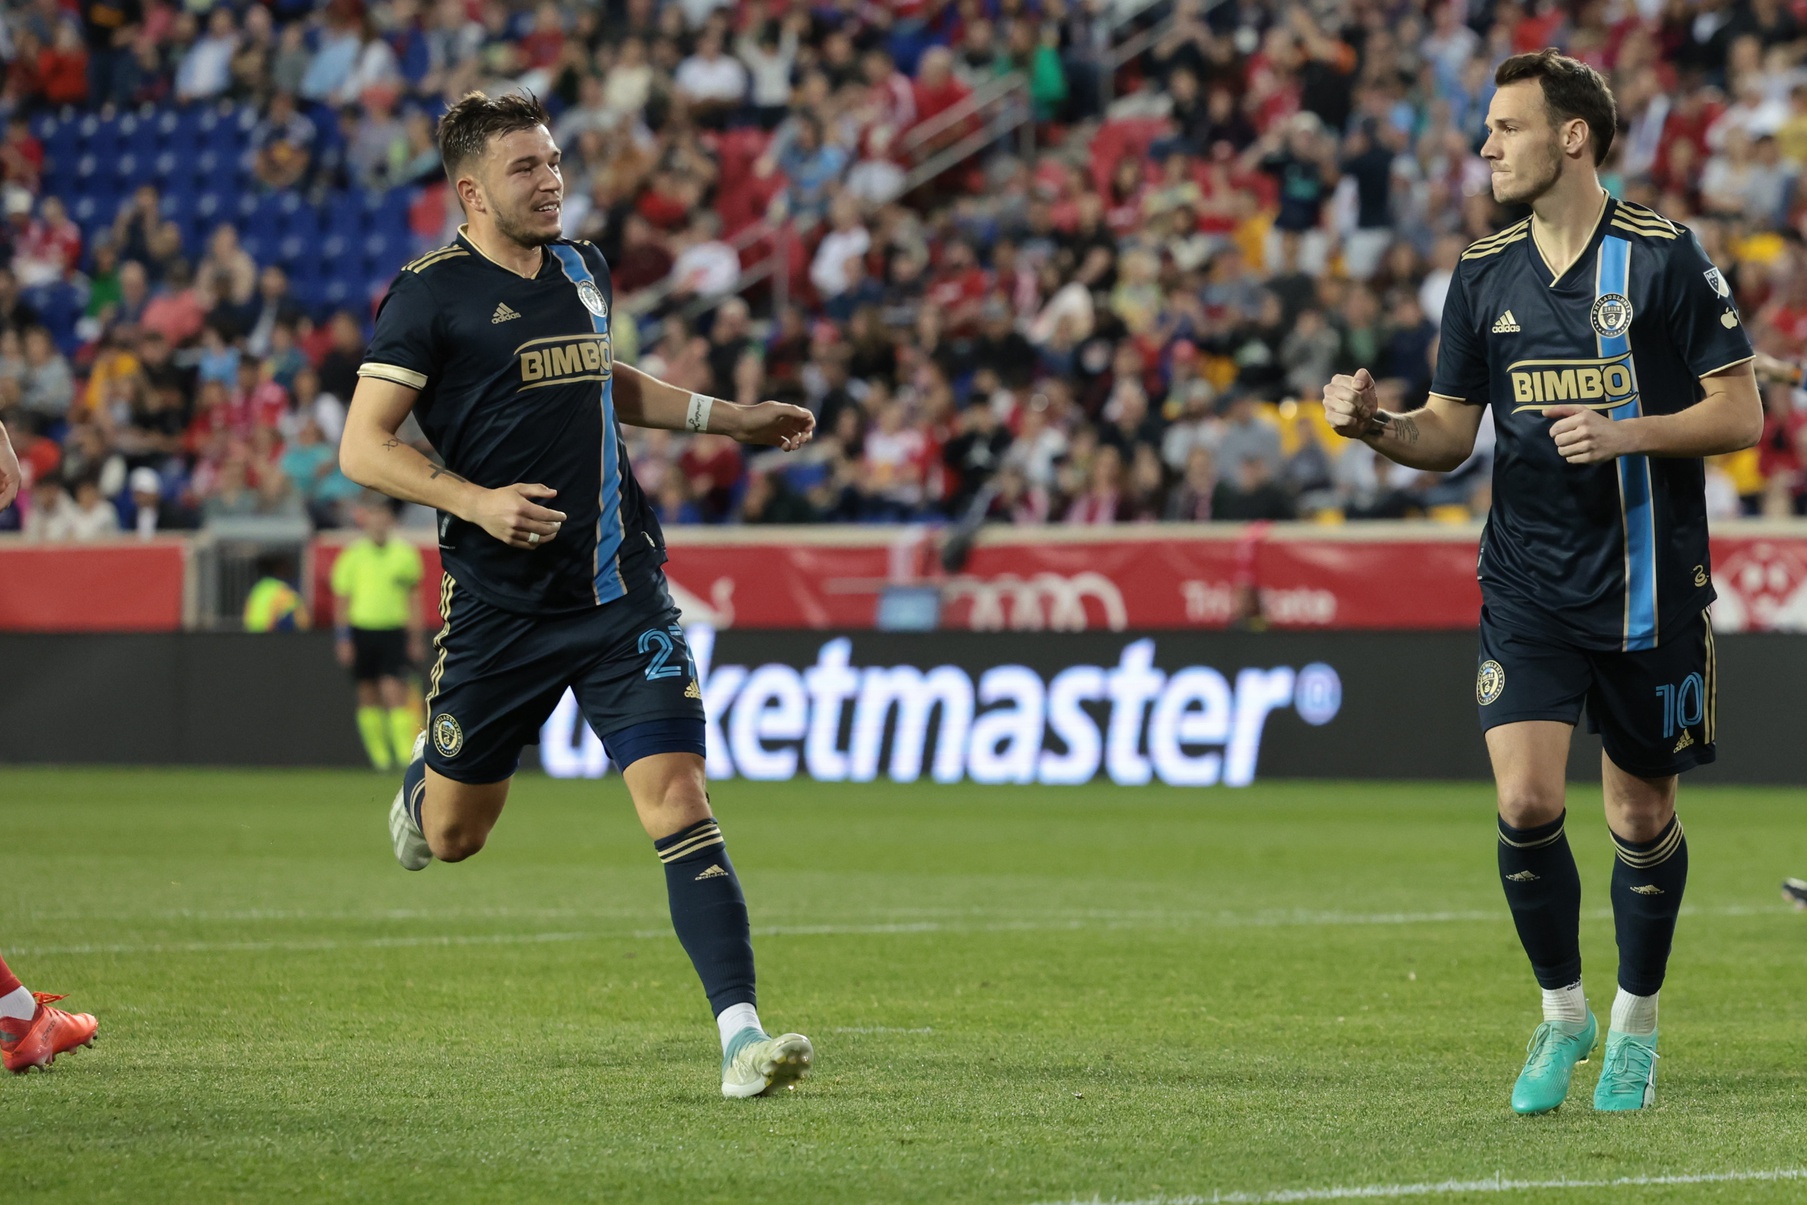 MLS: Philadelphia Union at New York Red Bulls at Red Bull Arena as Daniel Gazdag Scores Because of a Controversial Foul